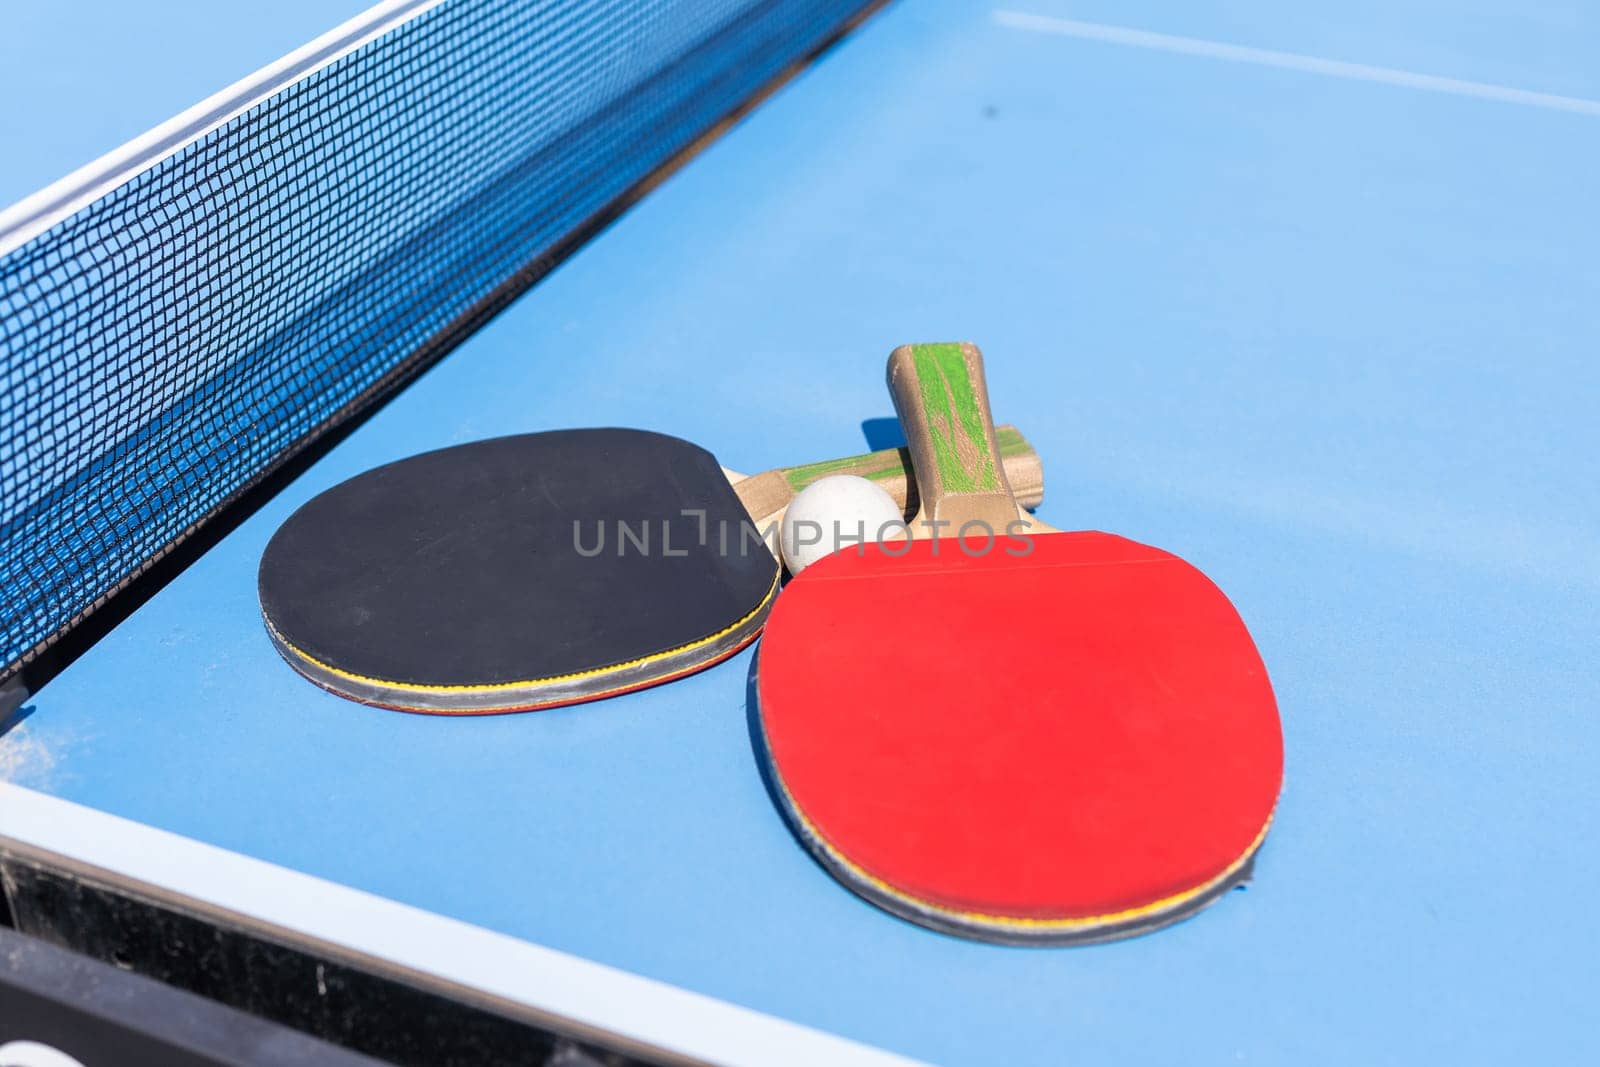 Two table tennis or ping pong rackets and ball on blue table with net by Andelov13